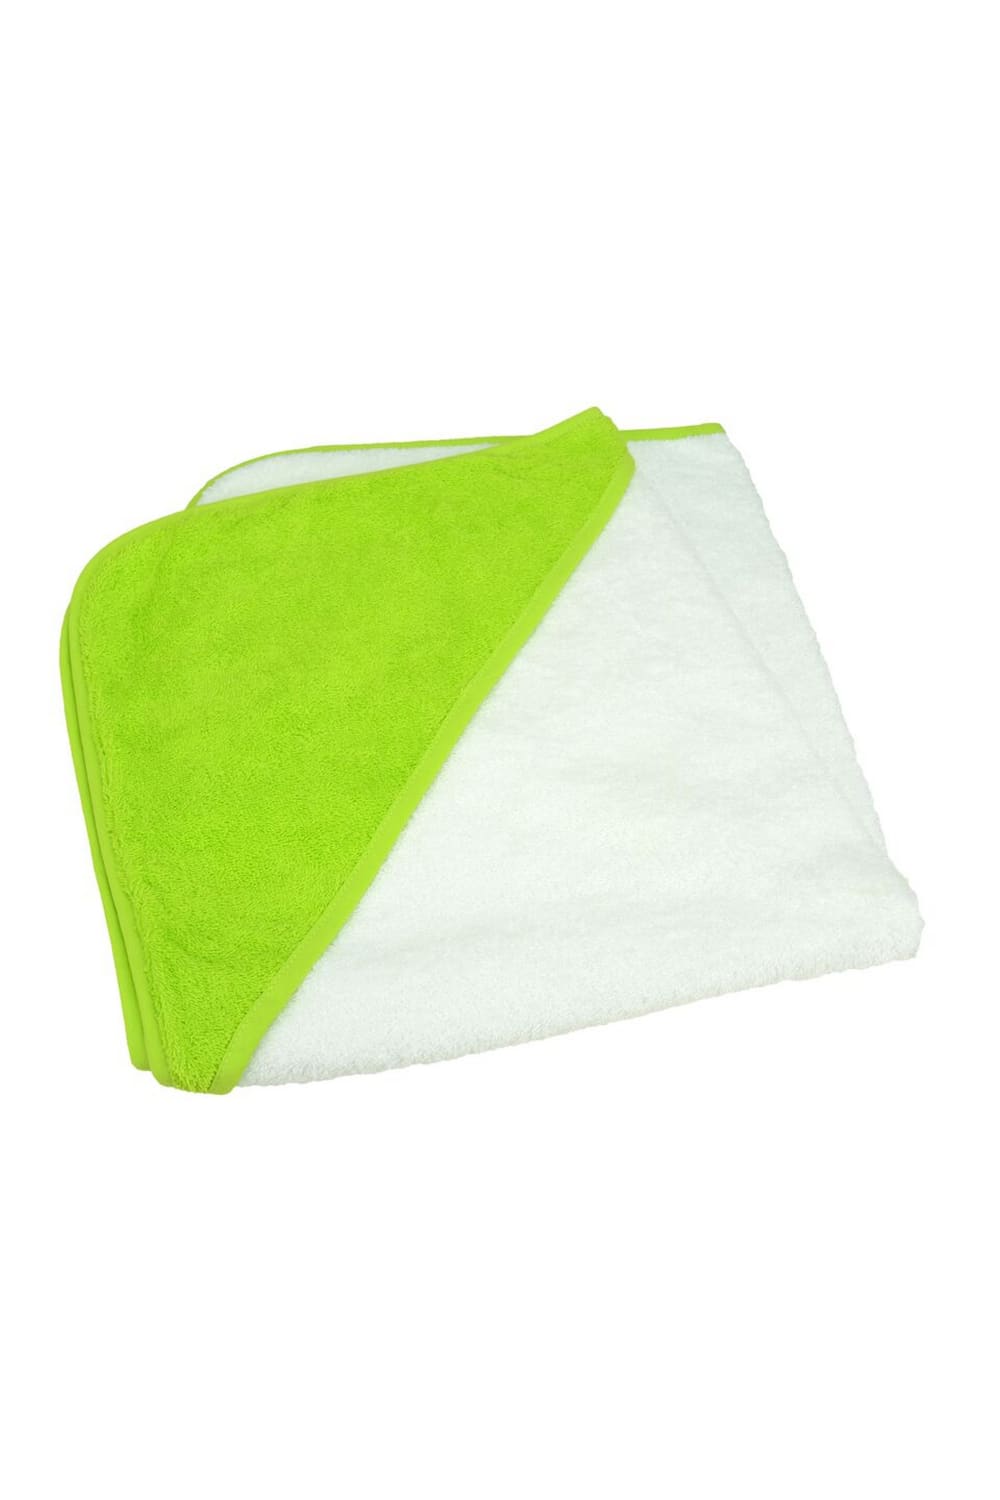 A&R Towels Baby/Toddler Babiezz Medium Hooded Towel (White/Lime Green) (One Size)